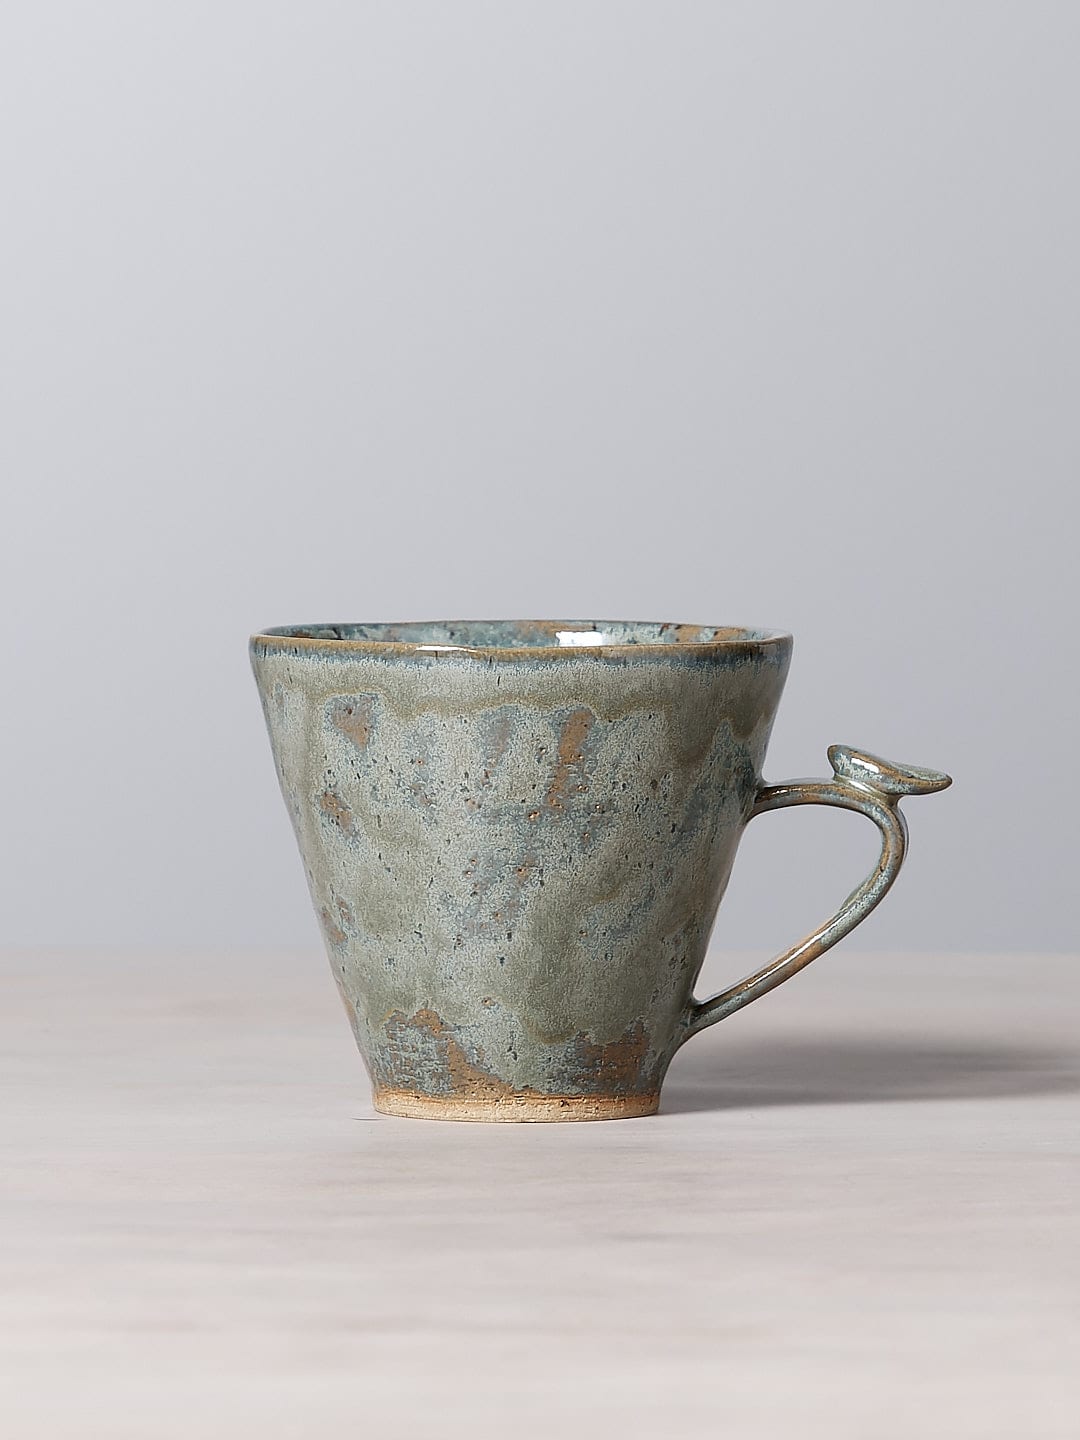 A Bird Handle Mug – Green Tea from Jino Ceramic Studio, with a bird on it, sitting on top of a table, perfect for tea-drinking.